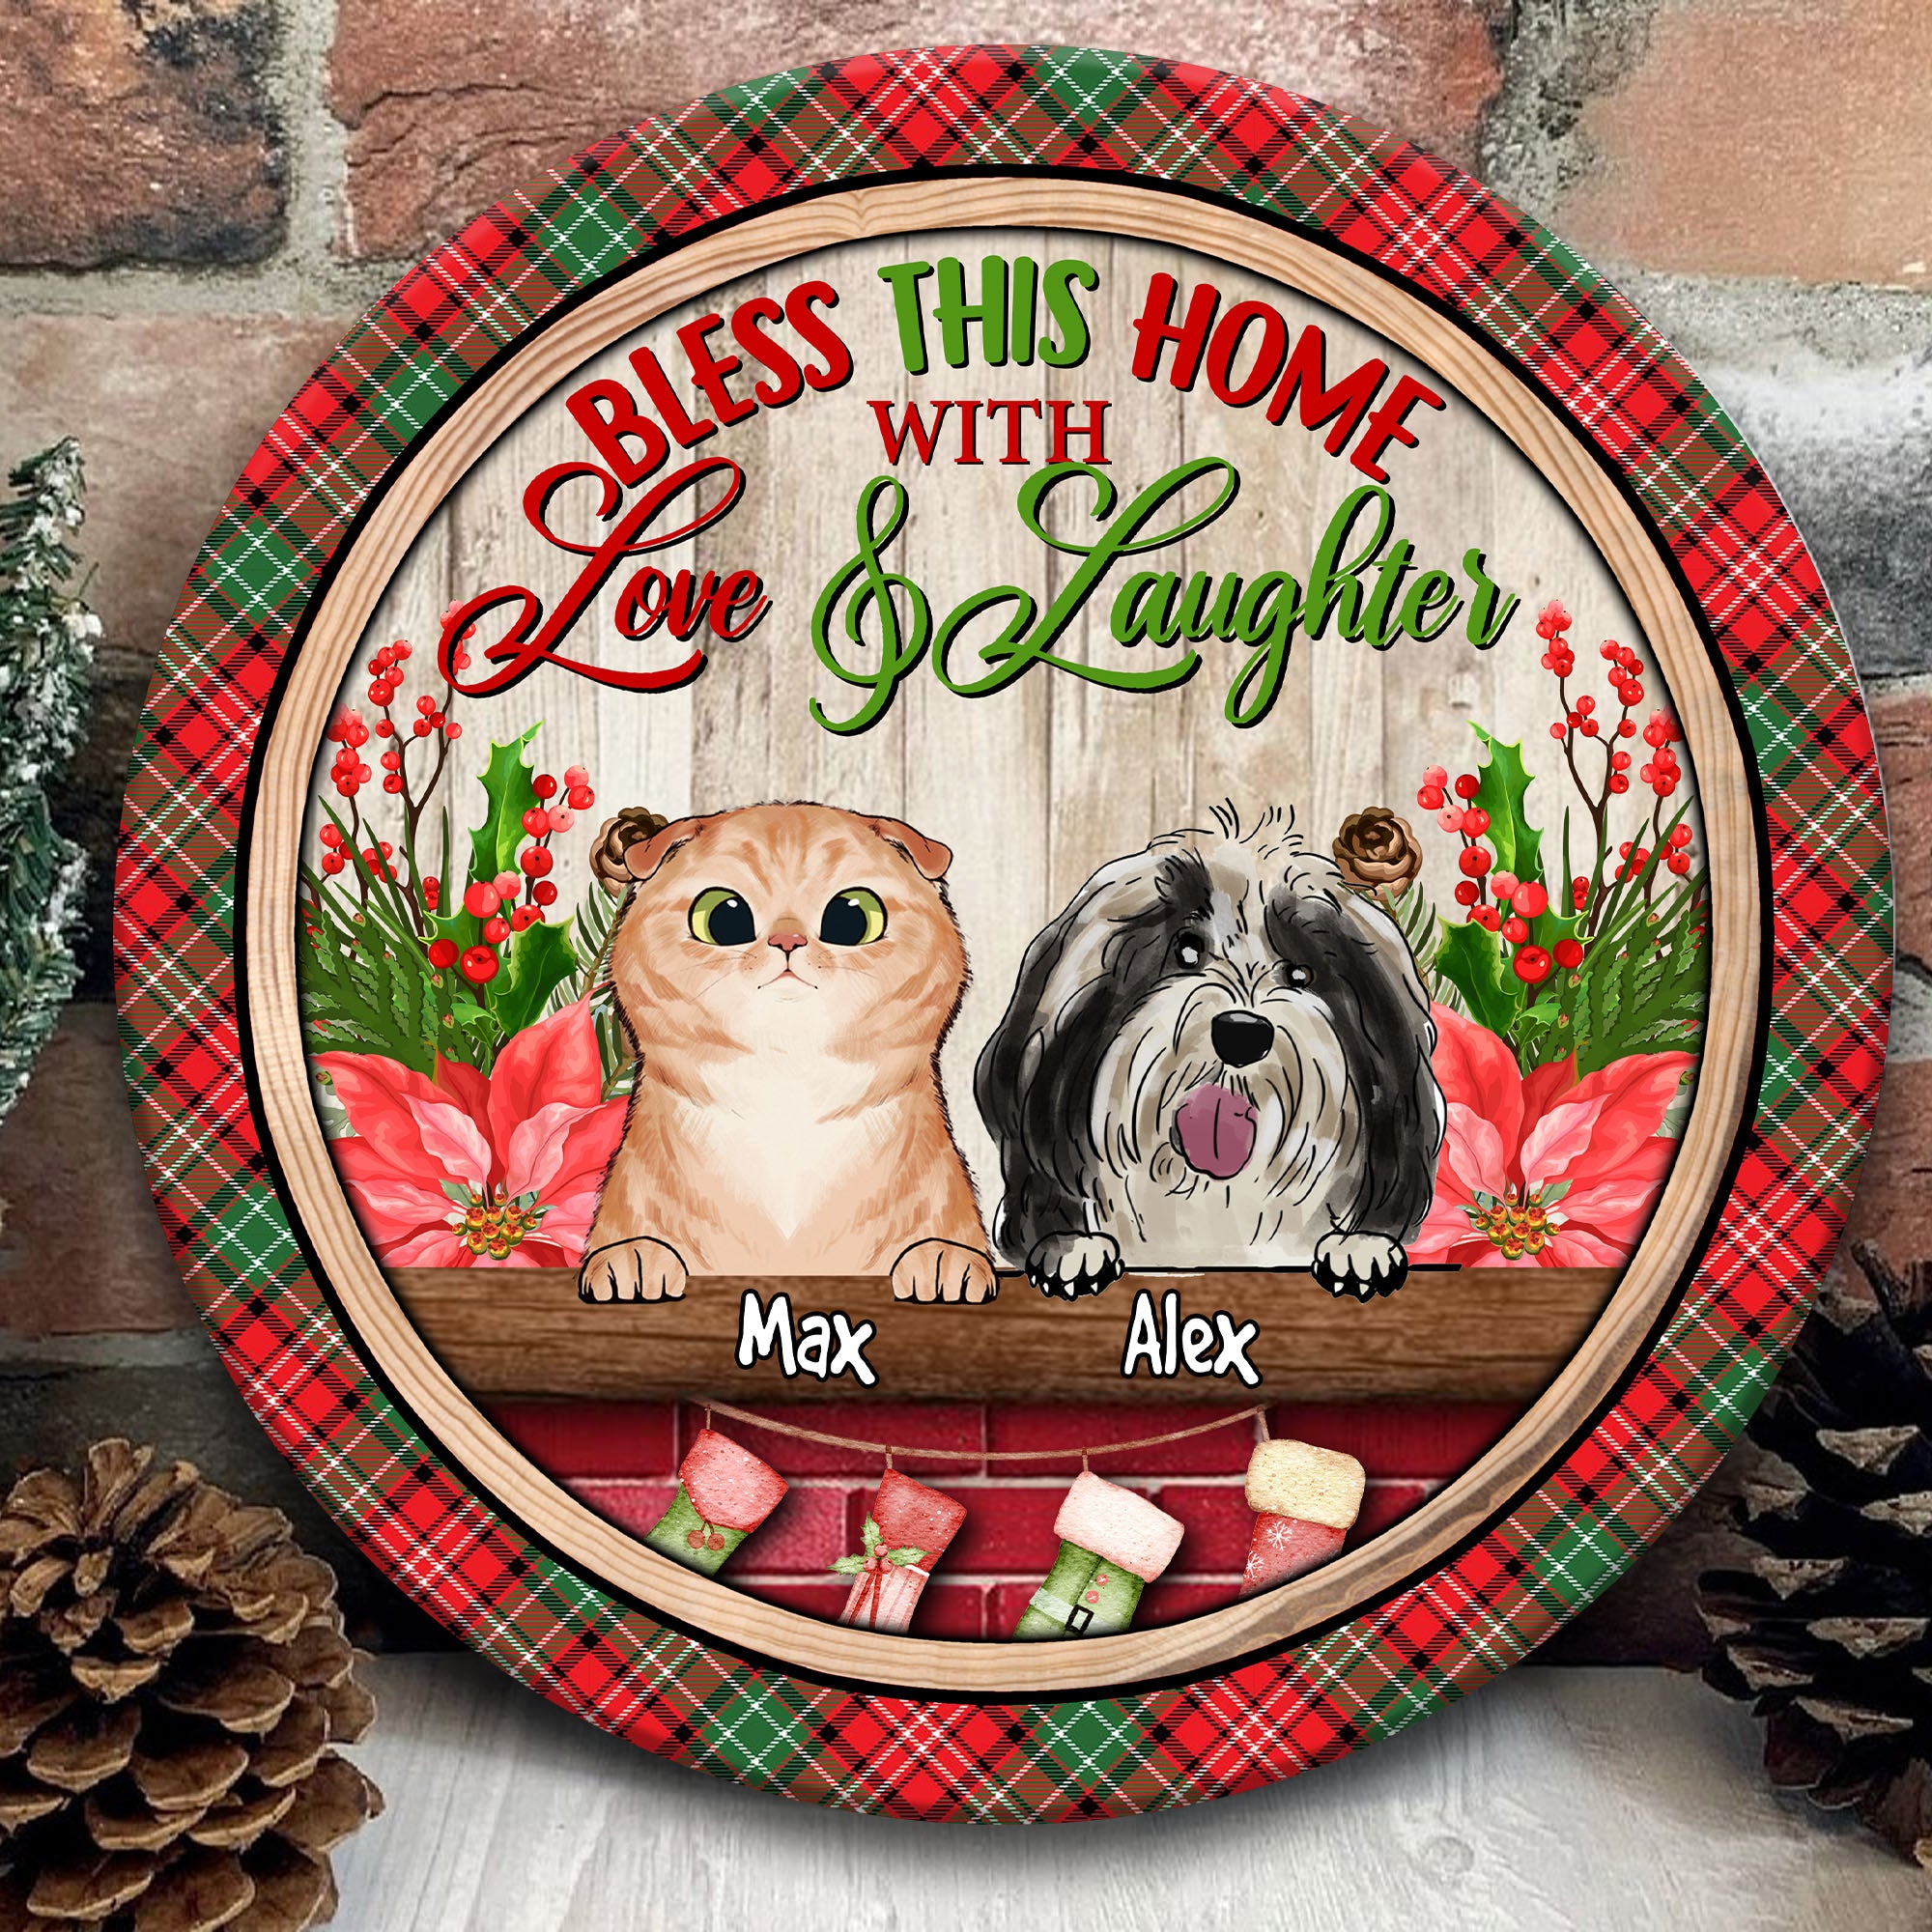 Bless This Home With Love and Laughter - Custom Pet And Name - Personalized Wooden Door Sign - Pet Lover Gift